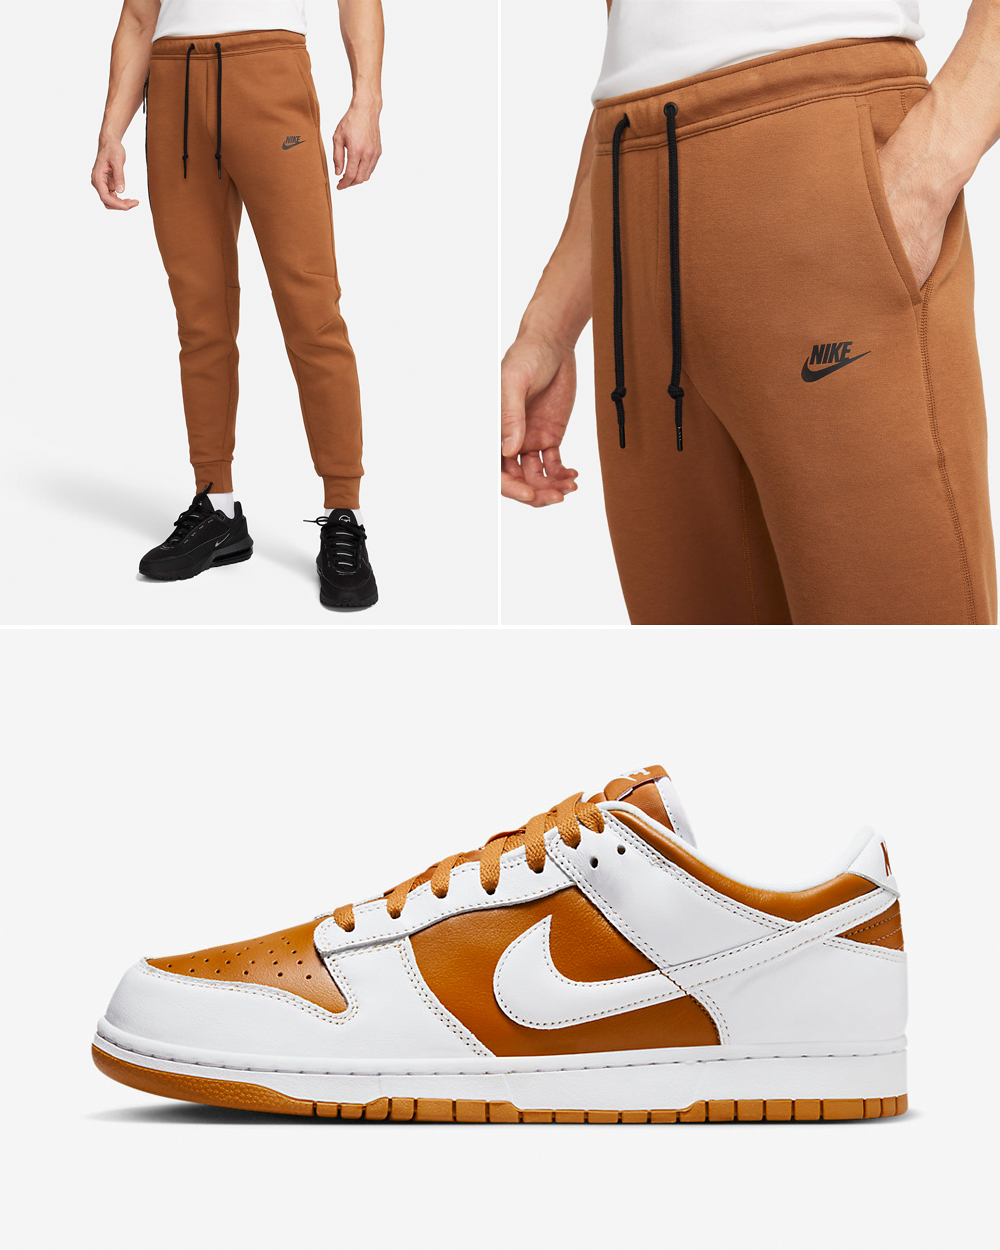 Nike-Dunk-Low-Reverse-Curry-Jogger-Pants-Matching-Outfit